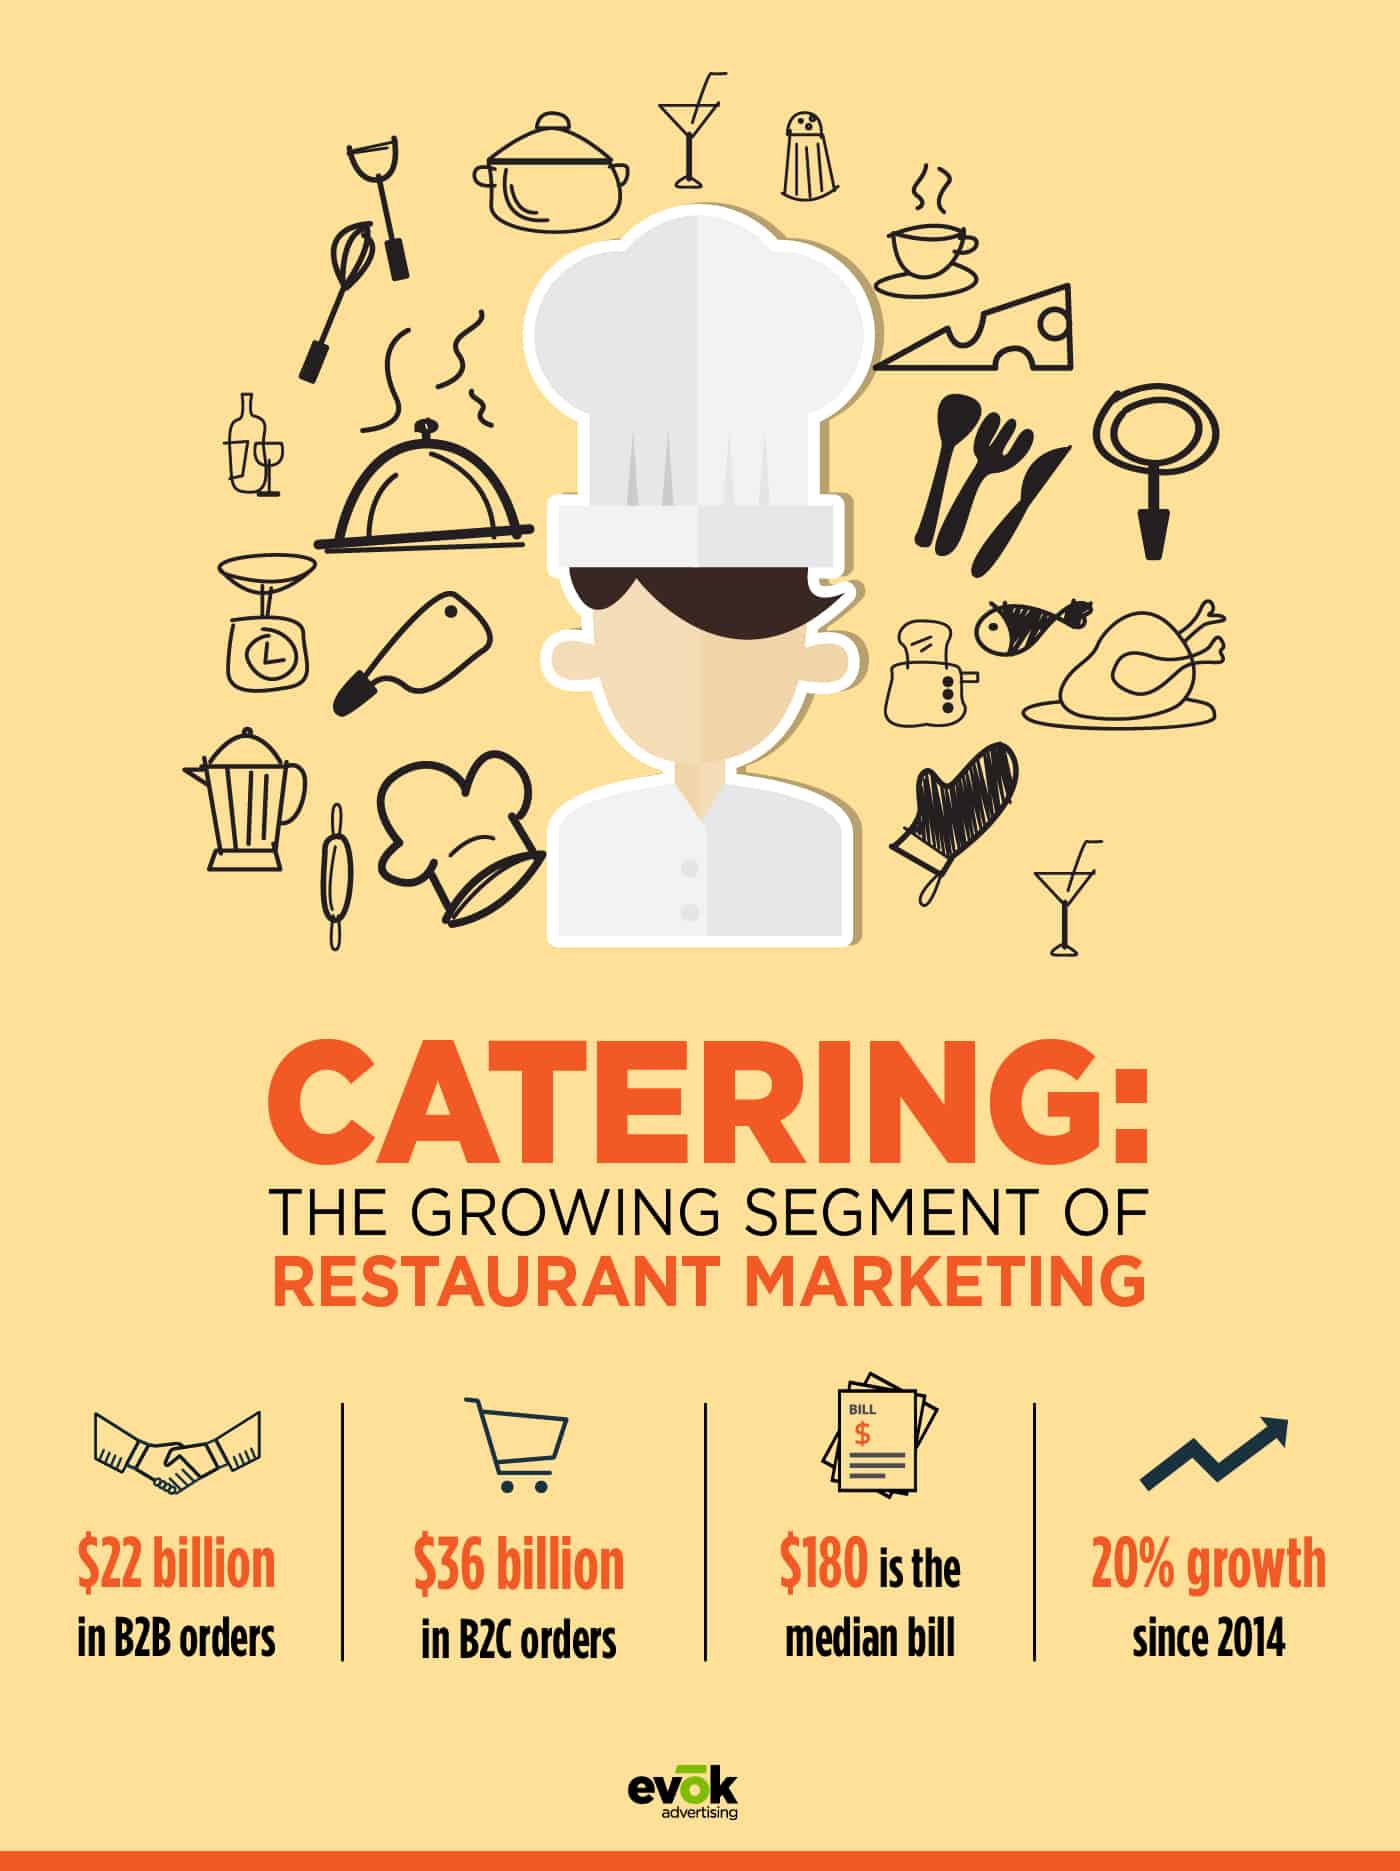 Catering: The Growing Segment of Restaurant Marketing